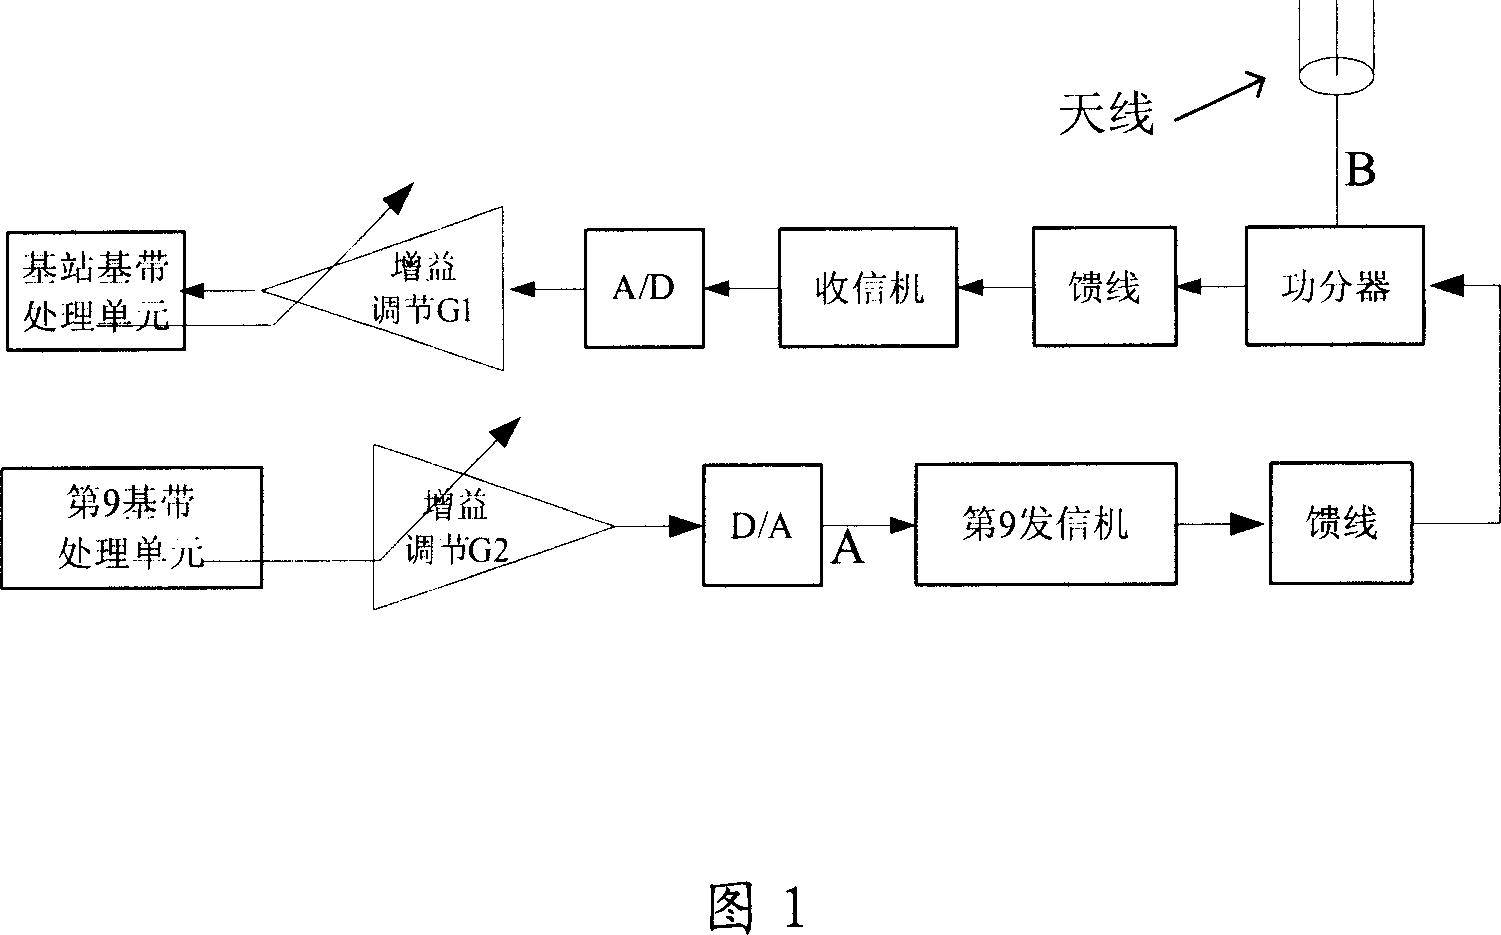 Apparatus and method for interference suppression in a wireless communication system